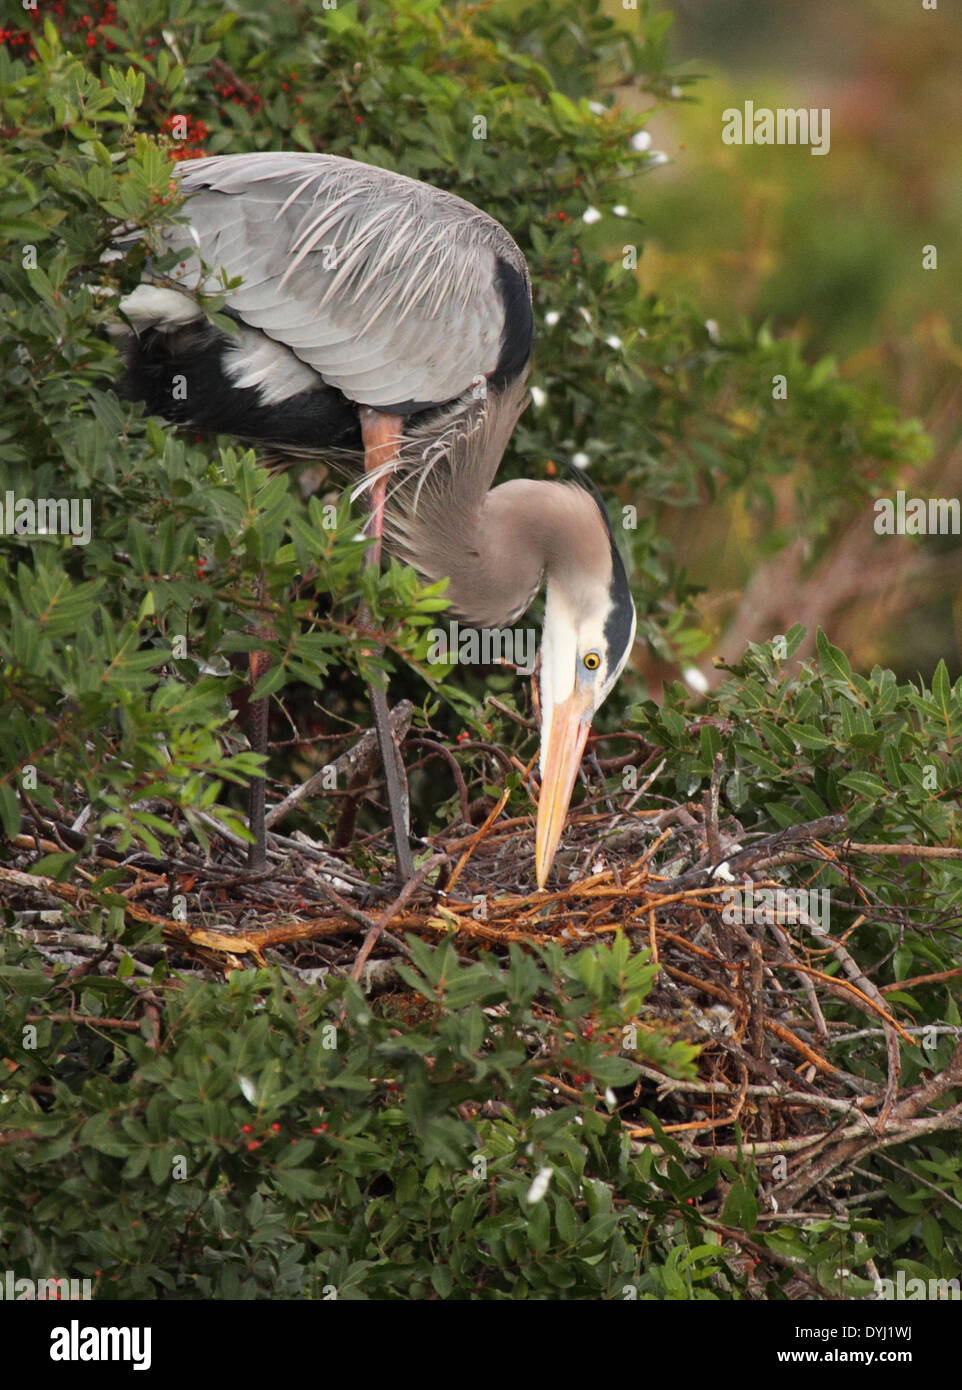 A Great Blue Heron adjusting sticks as it builds its nest in Florida. Stock Photo